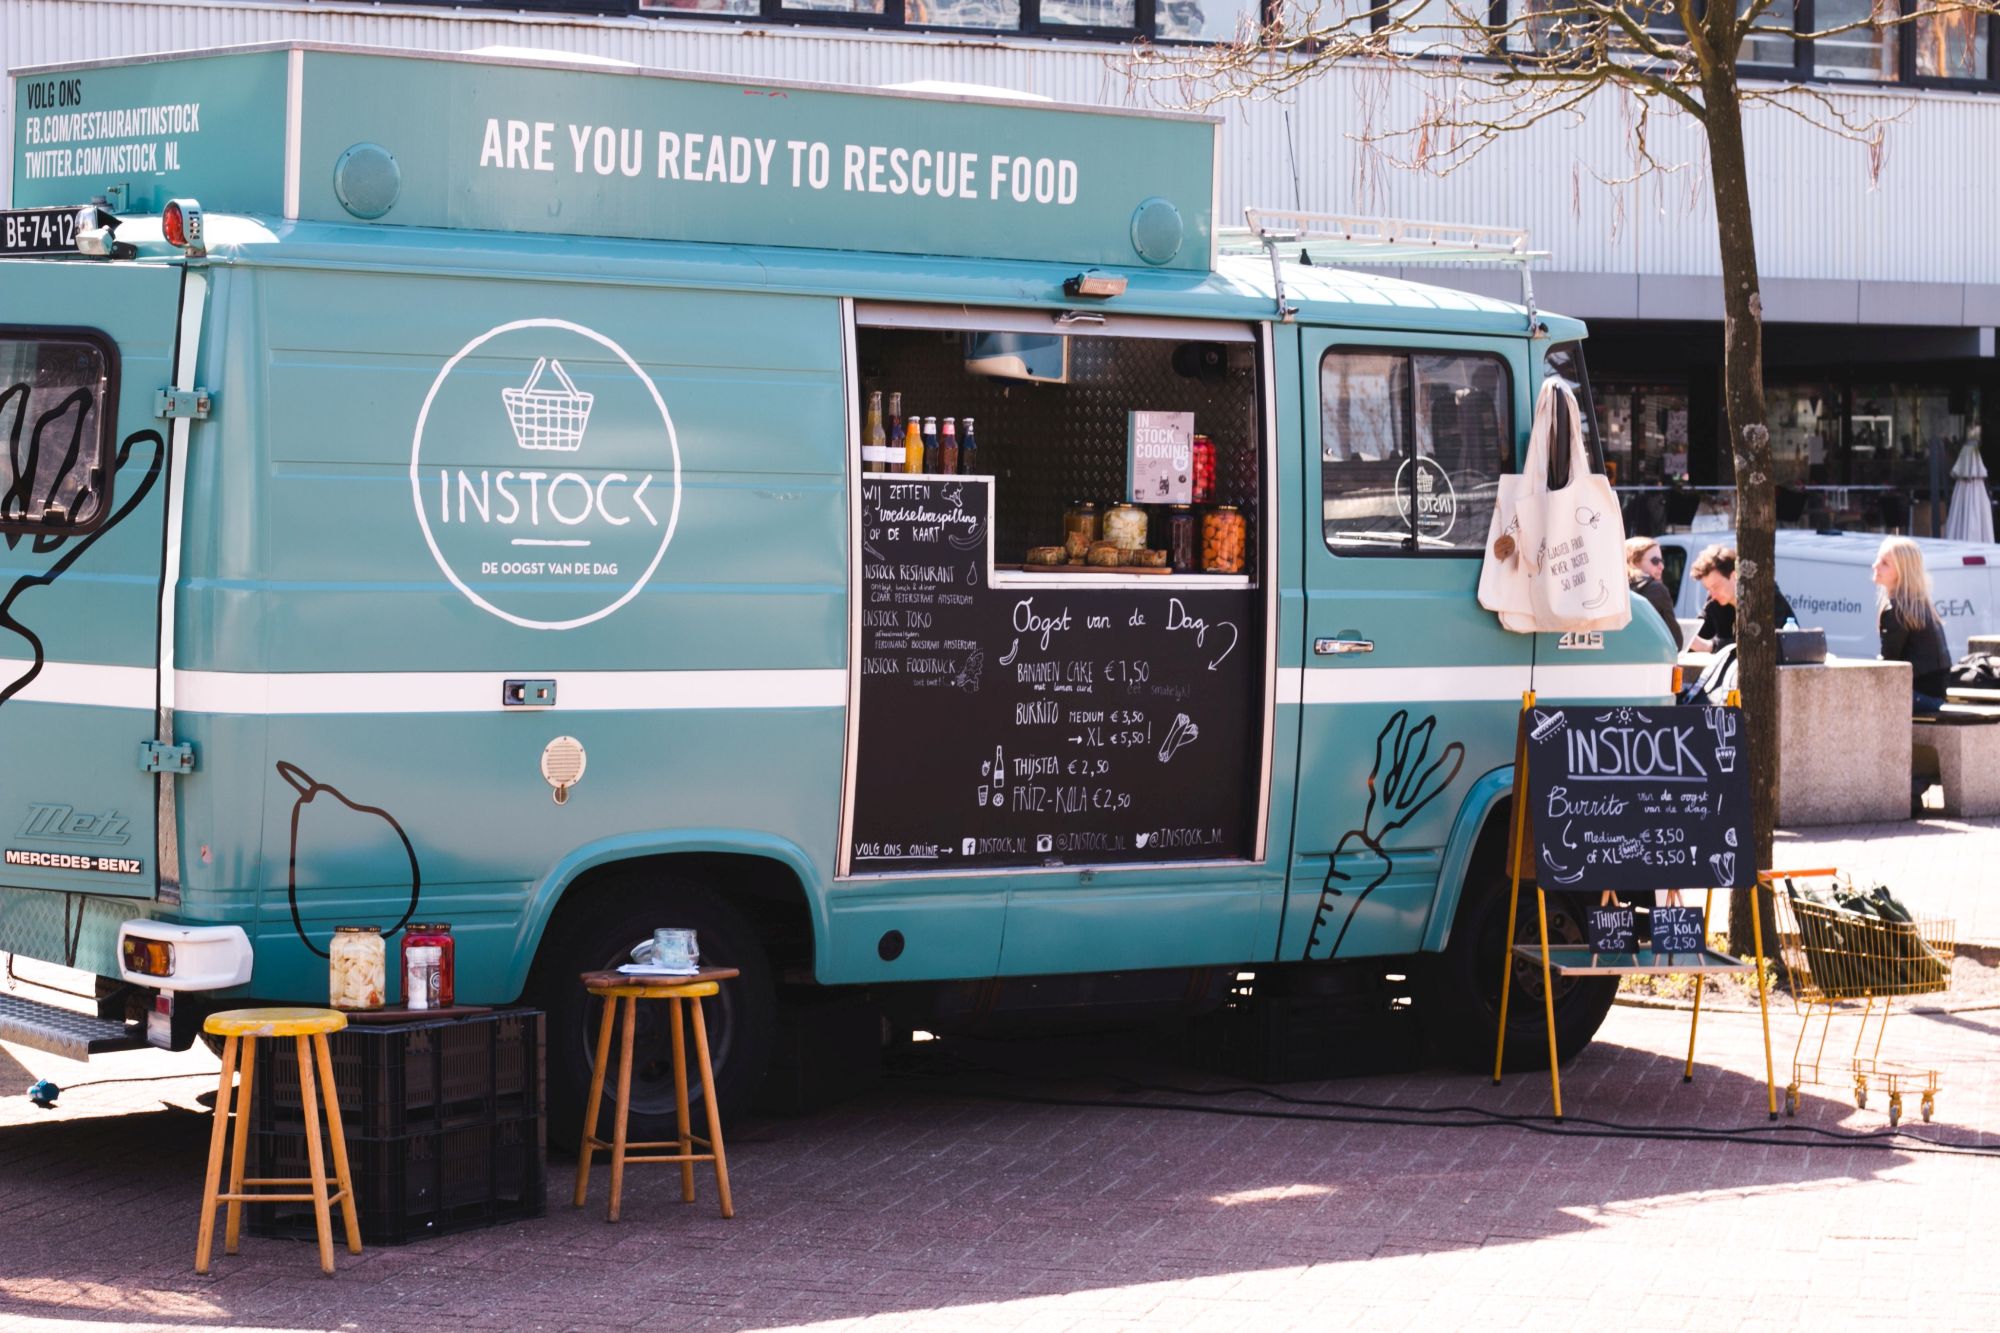 afacerefoodtruck